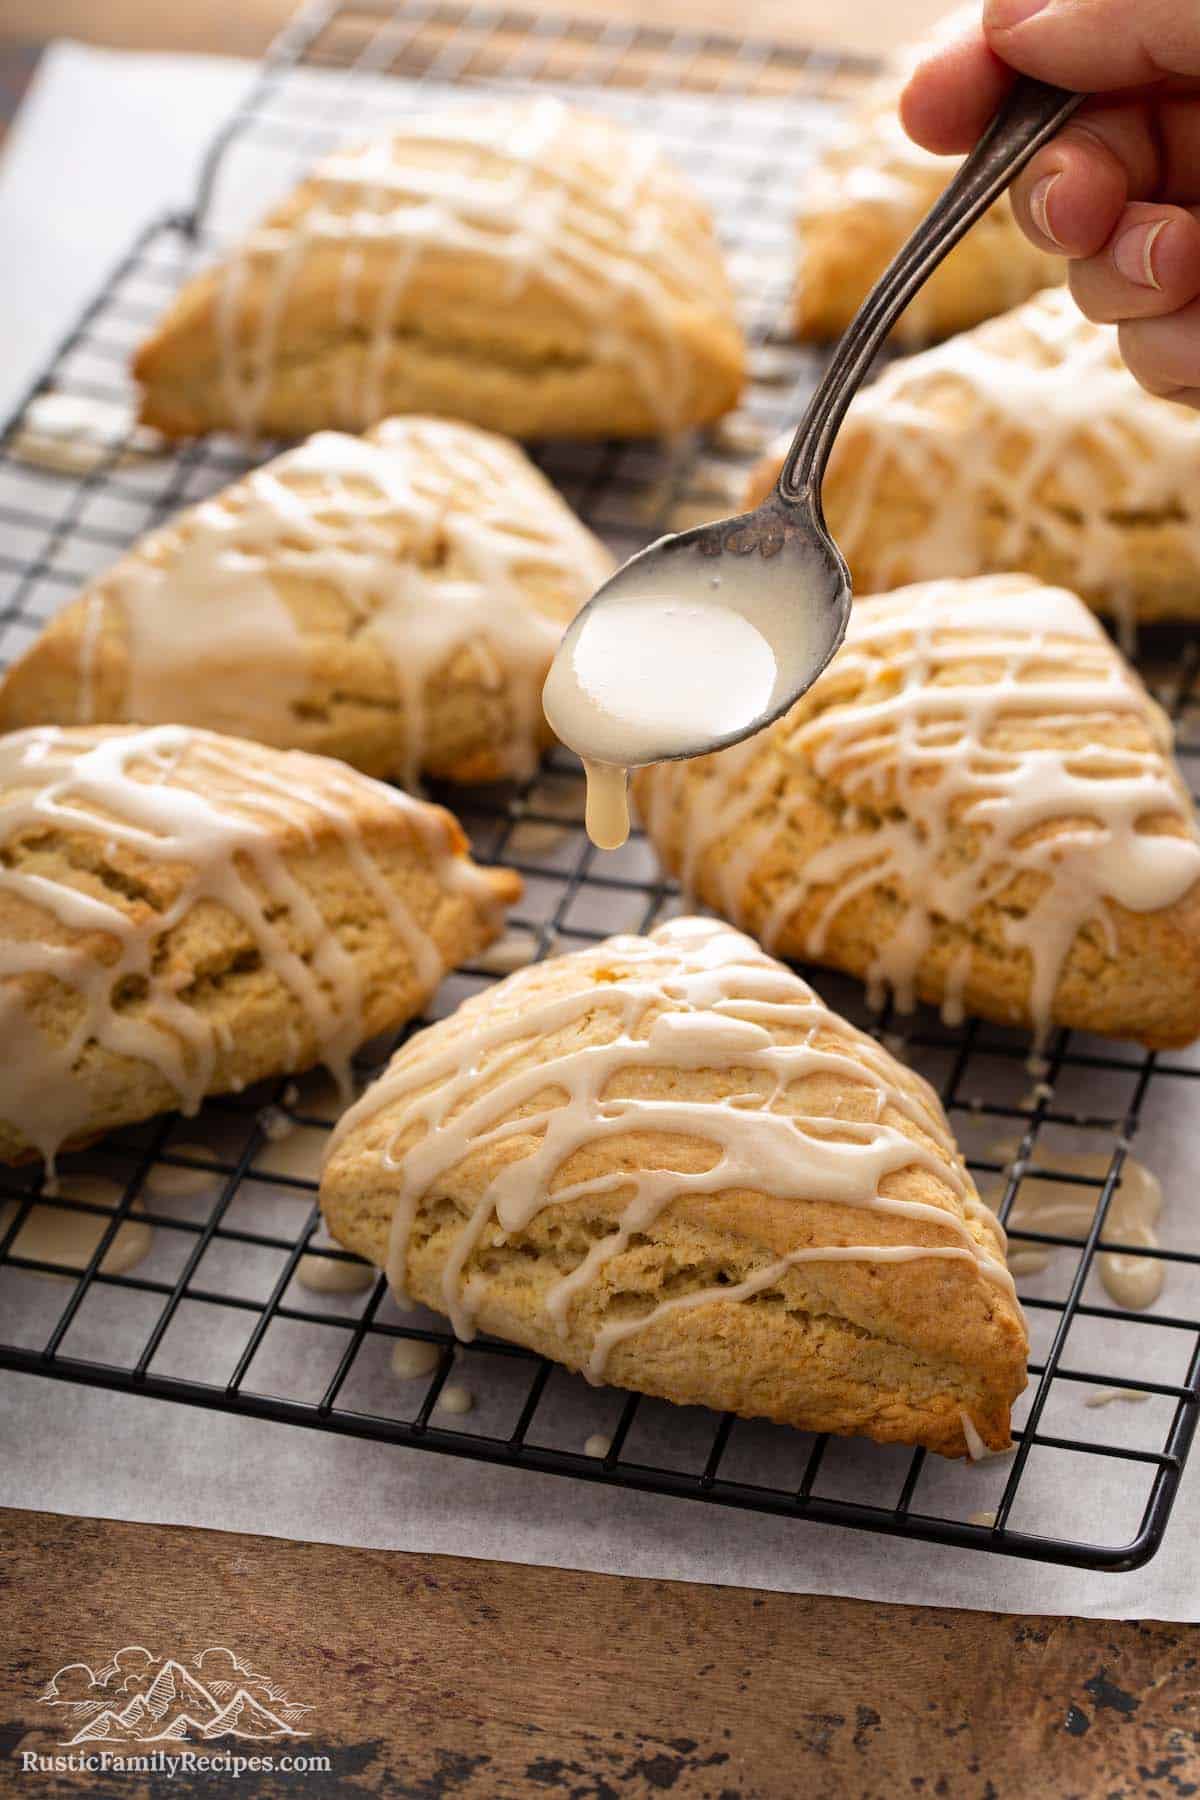 Spooning maple glaze over freshly baked scones on wire cooling rack